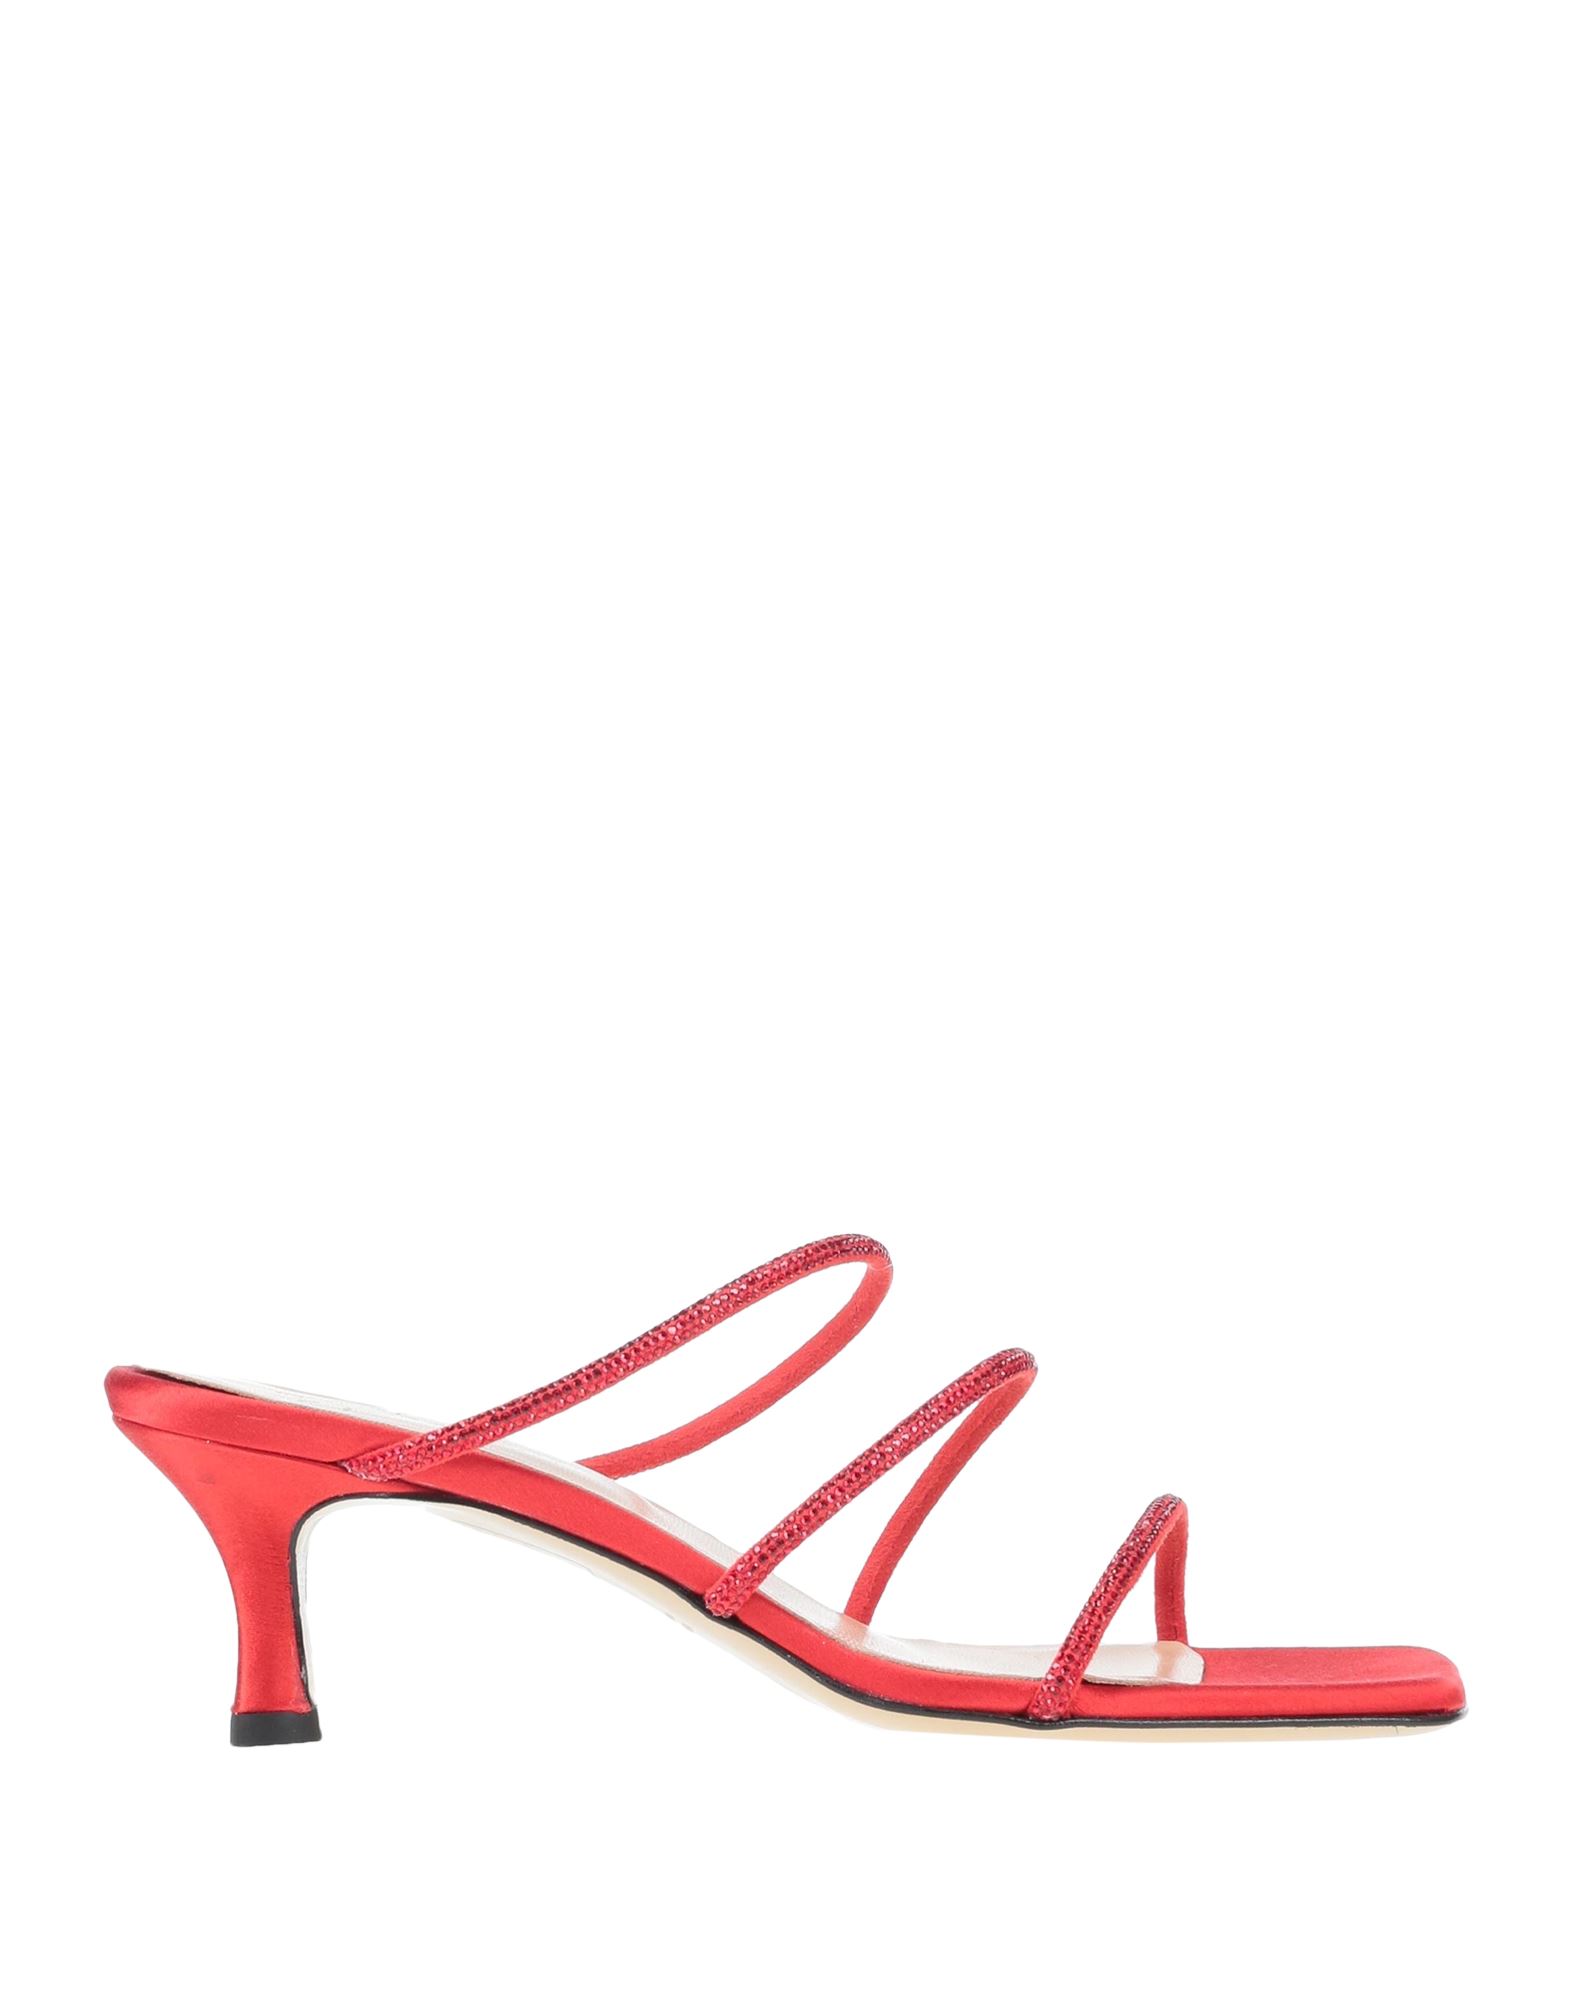 Mychalom Sandals In Red